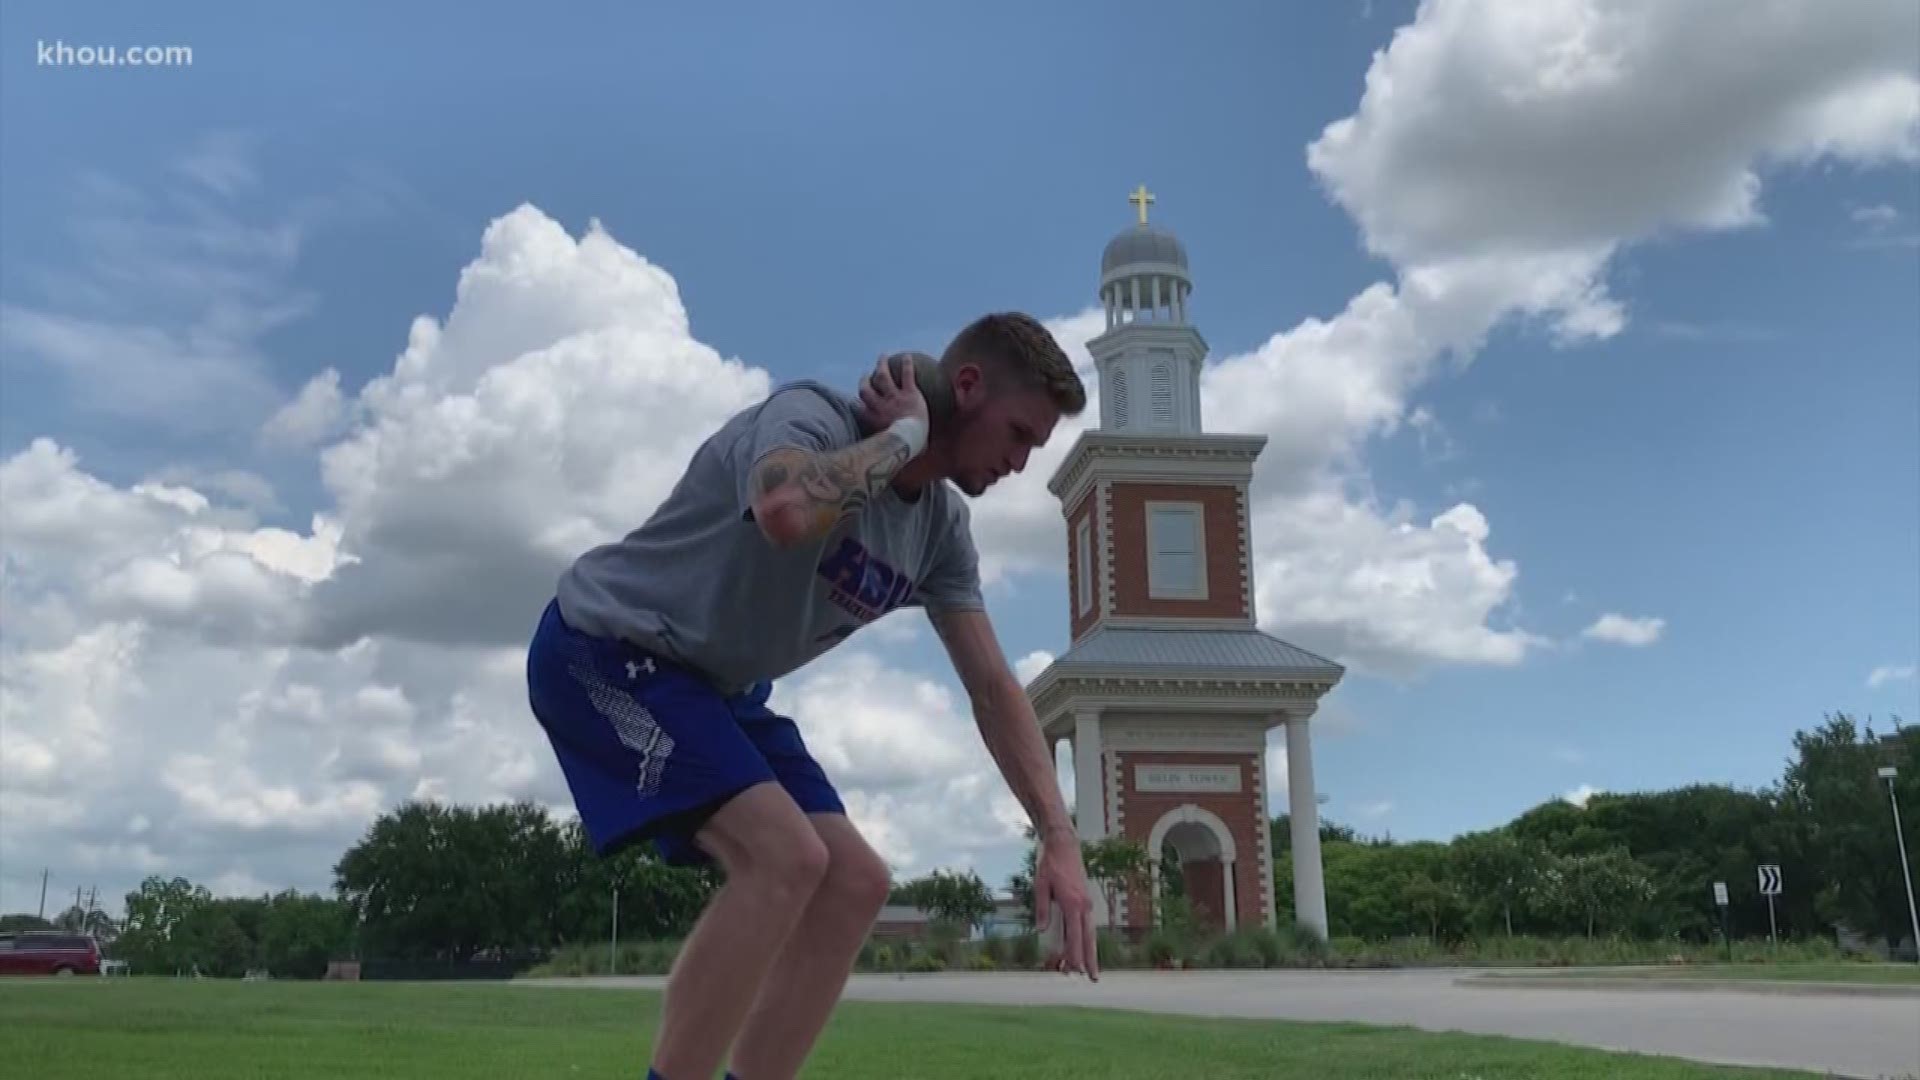 For the first time since re-starting its program, Houston Baptist is competing in the NCAA Track & Field Championships this week thanks in part to star Denim Rogers.